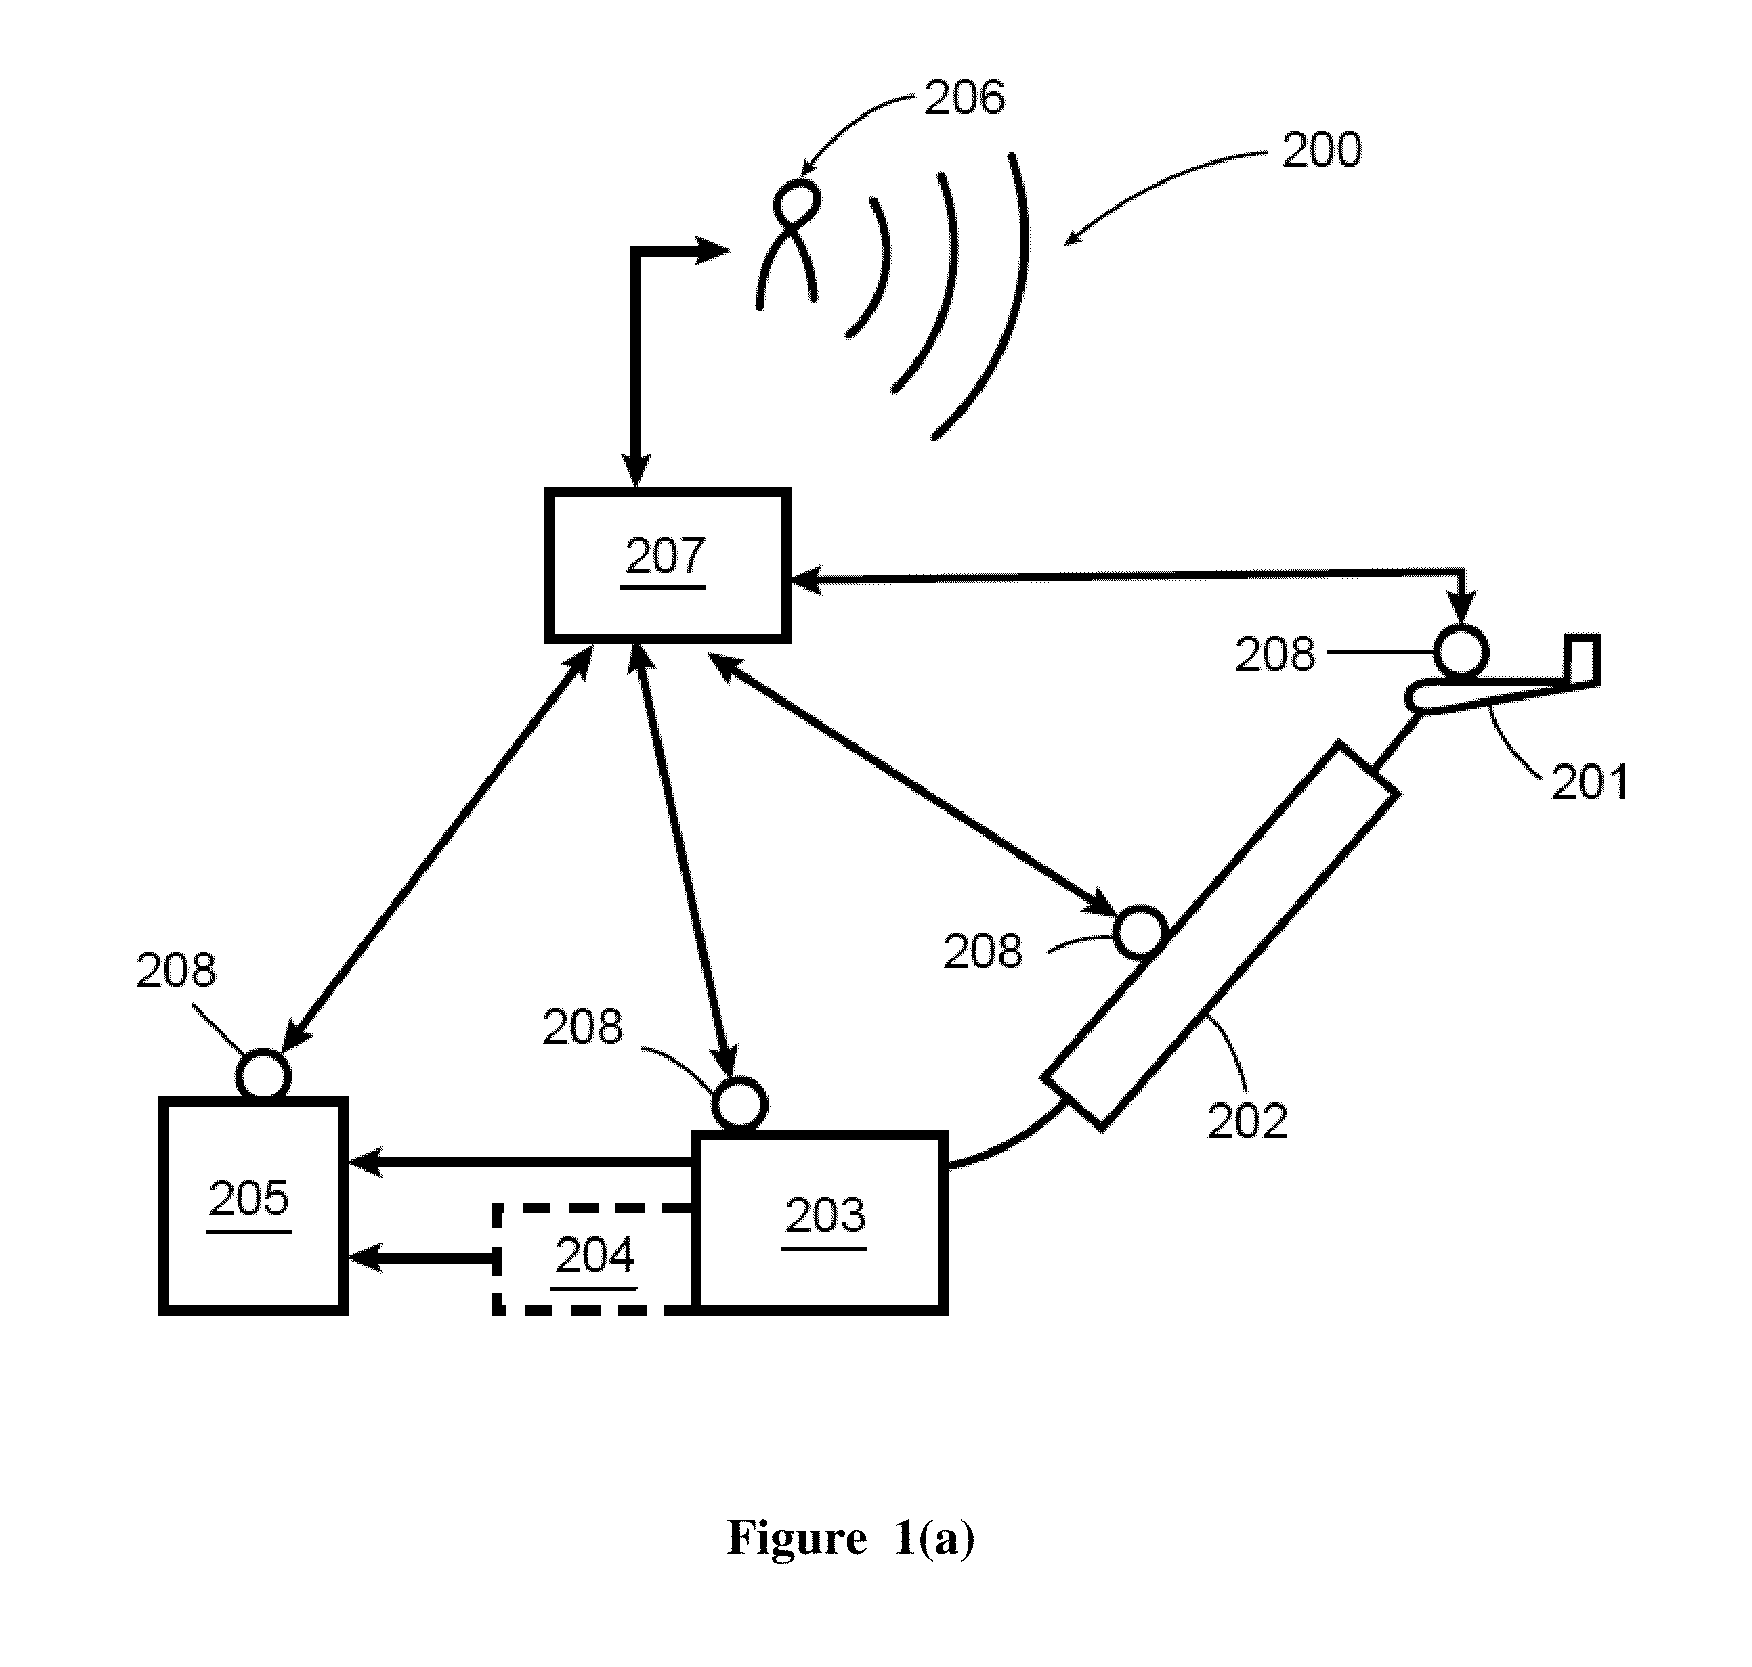 System and method for controlling a tethered flying craft using tether attachment point manipulation